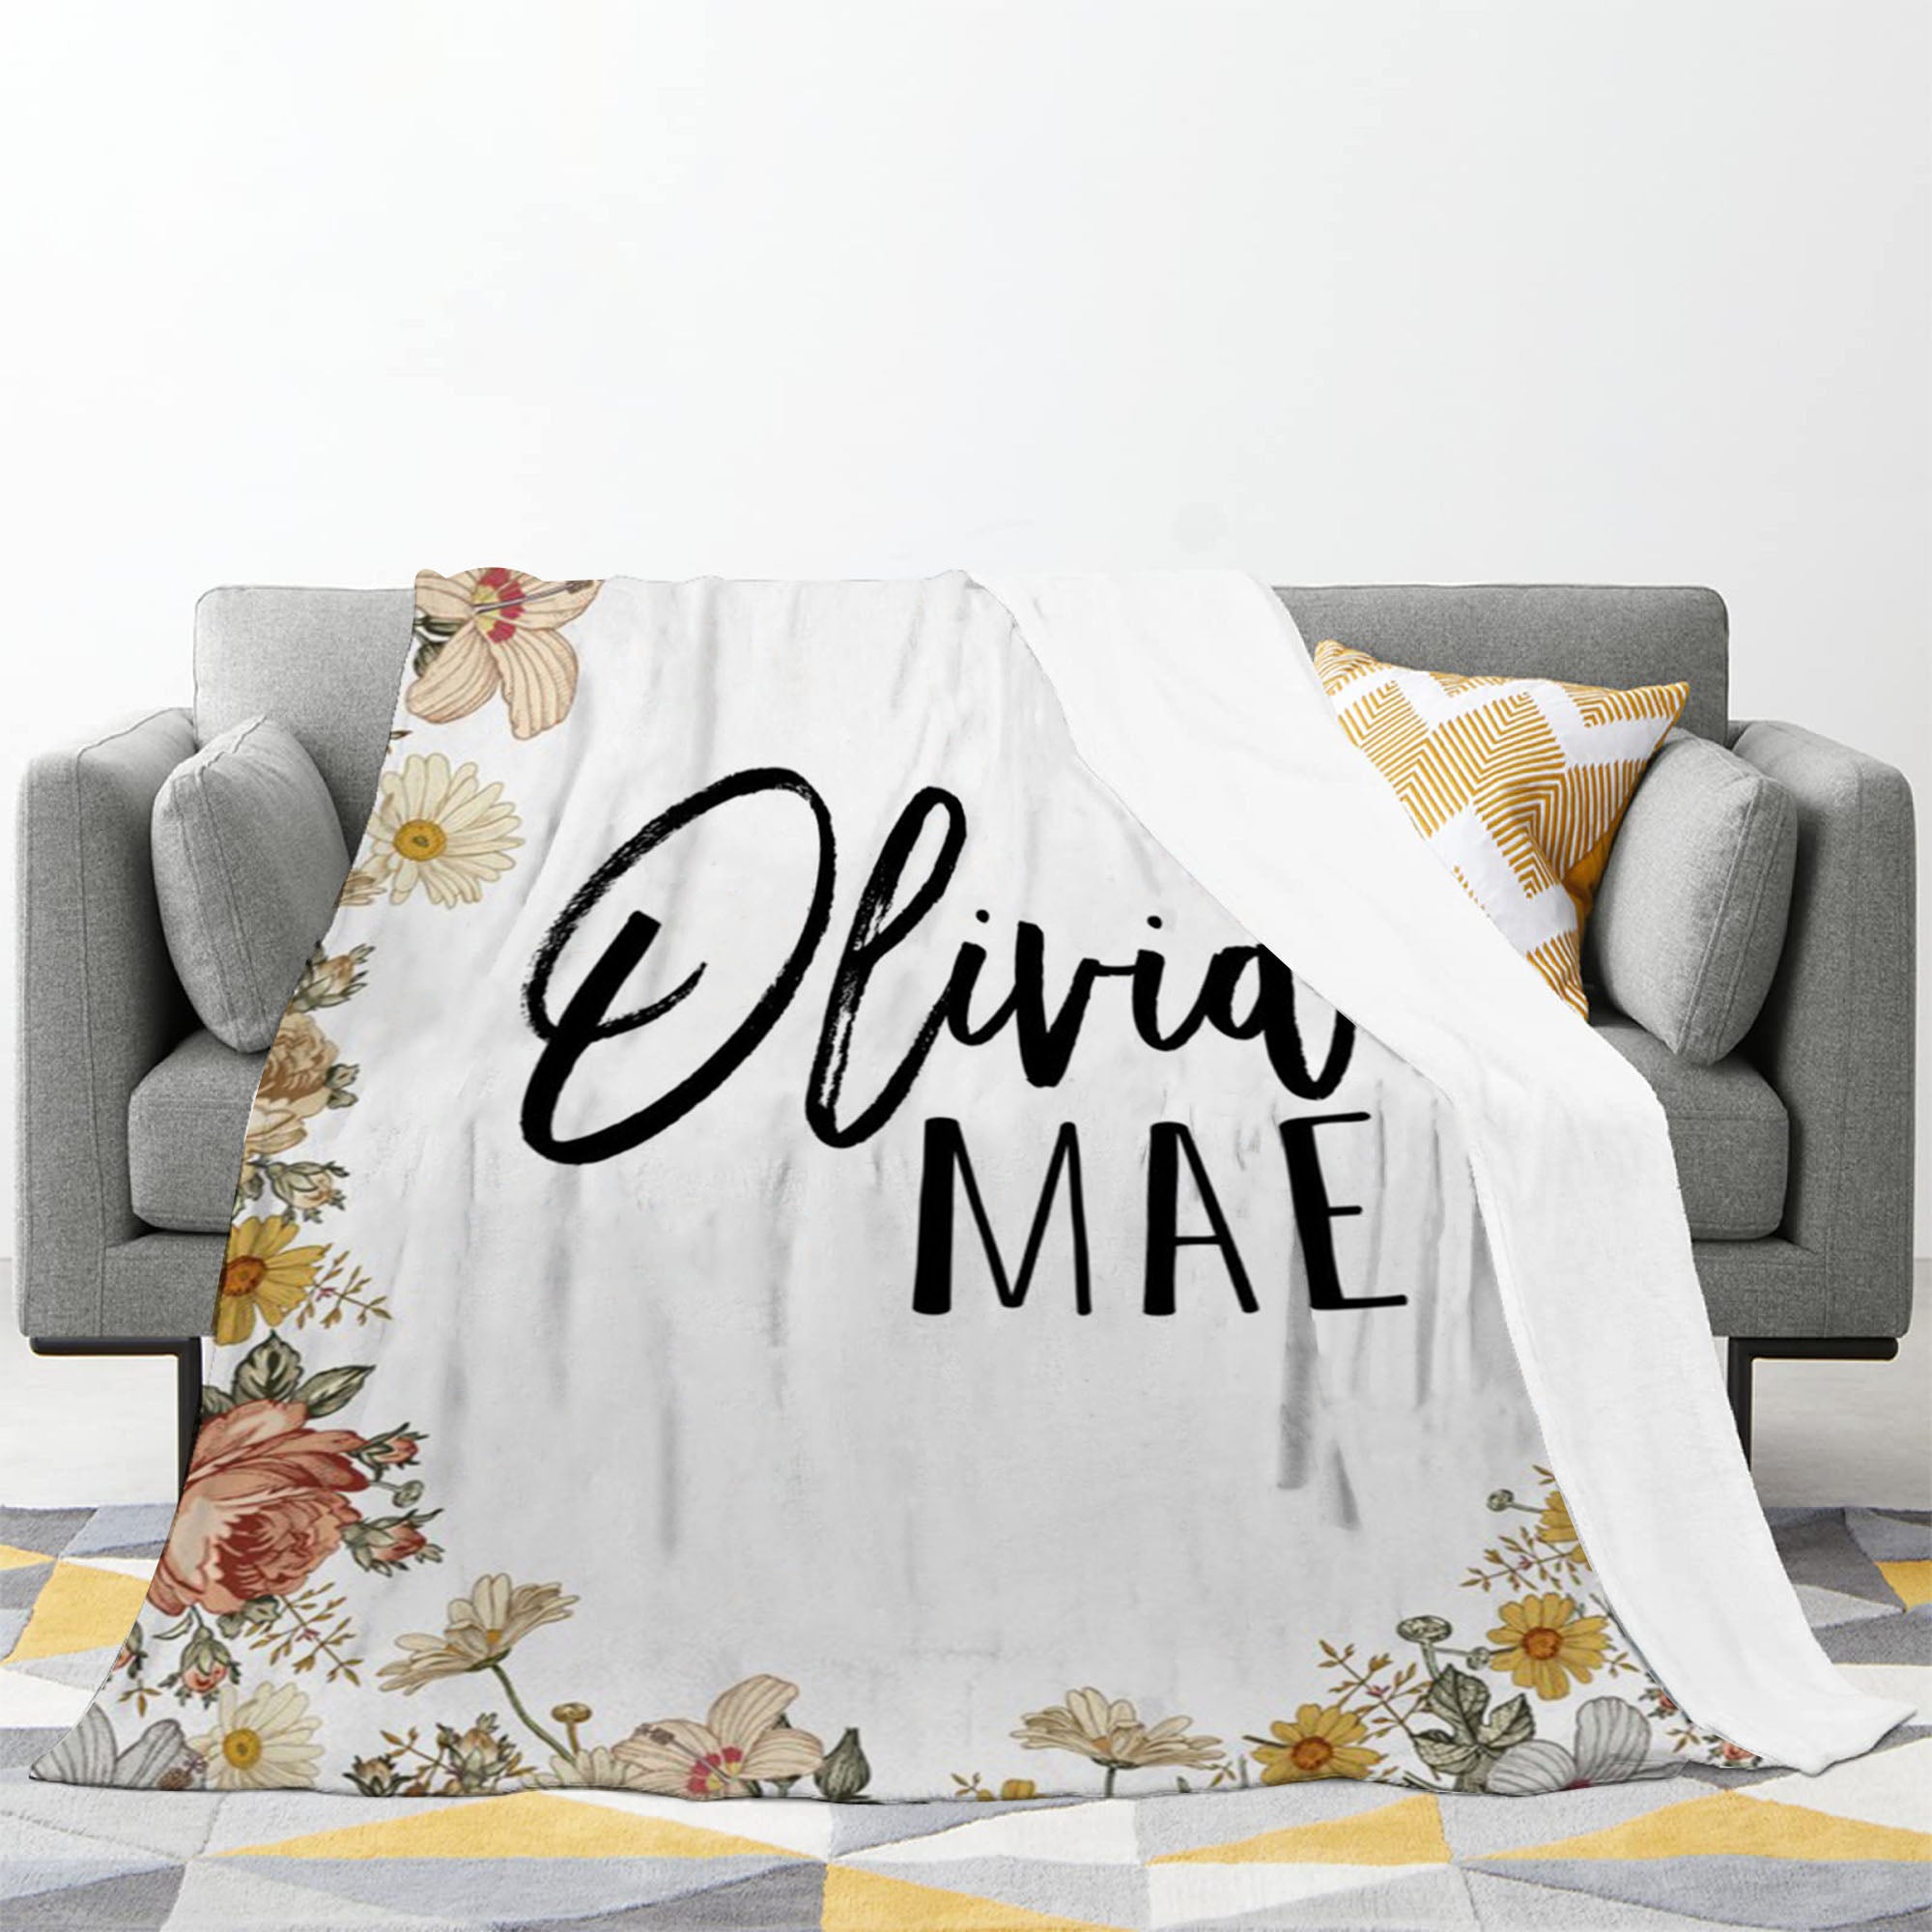 Personalized Floral Wreath Blanket With Name For Adult, Kids